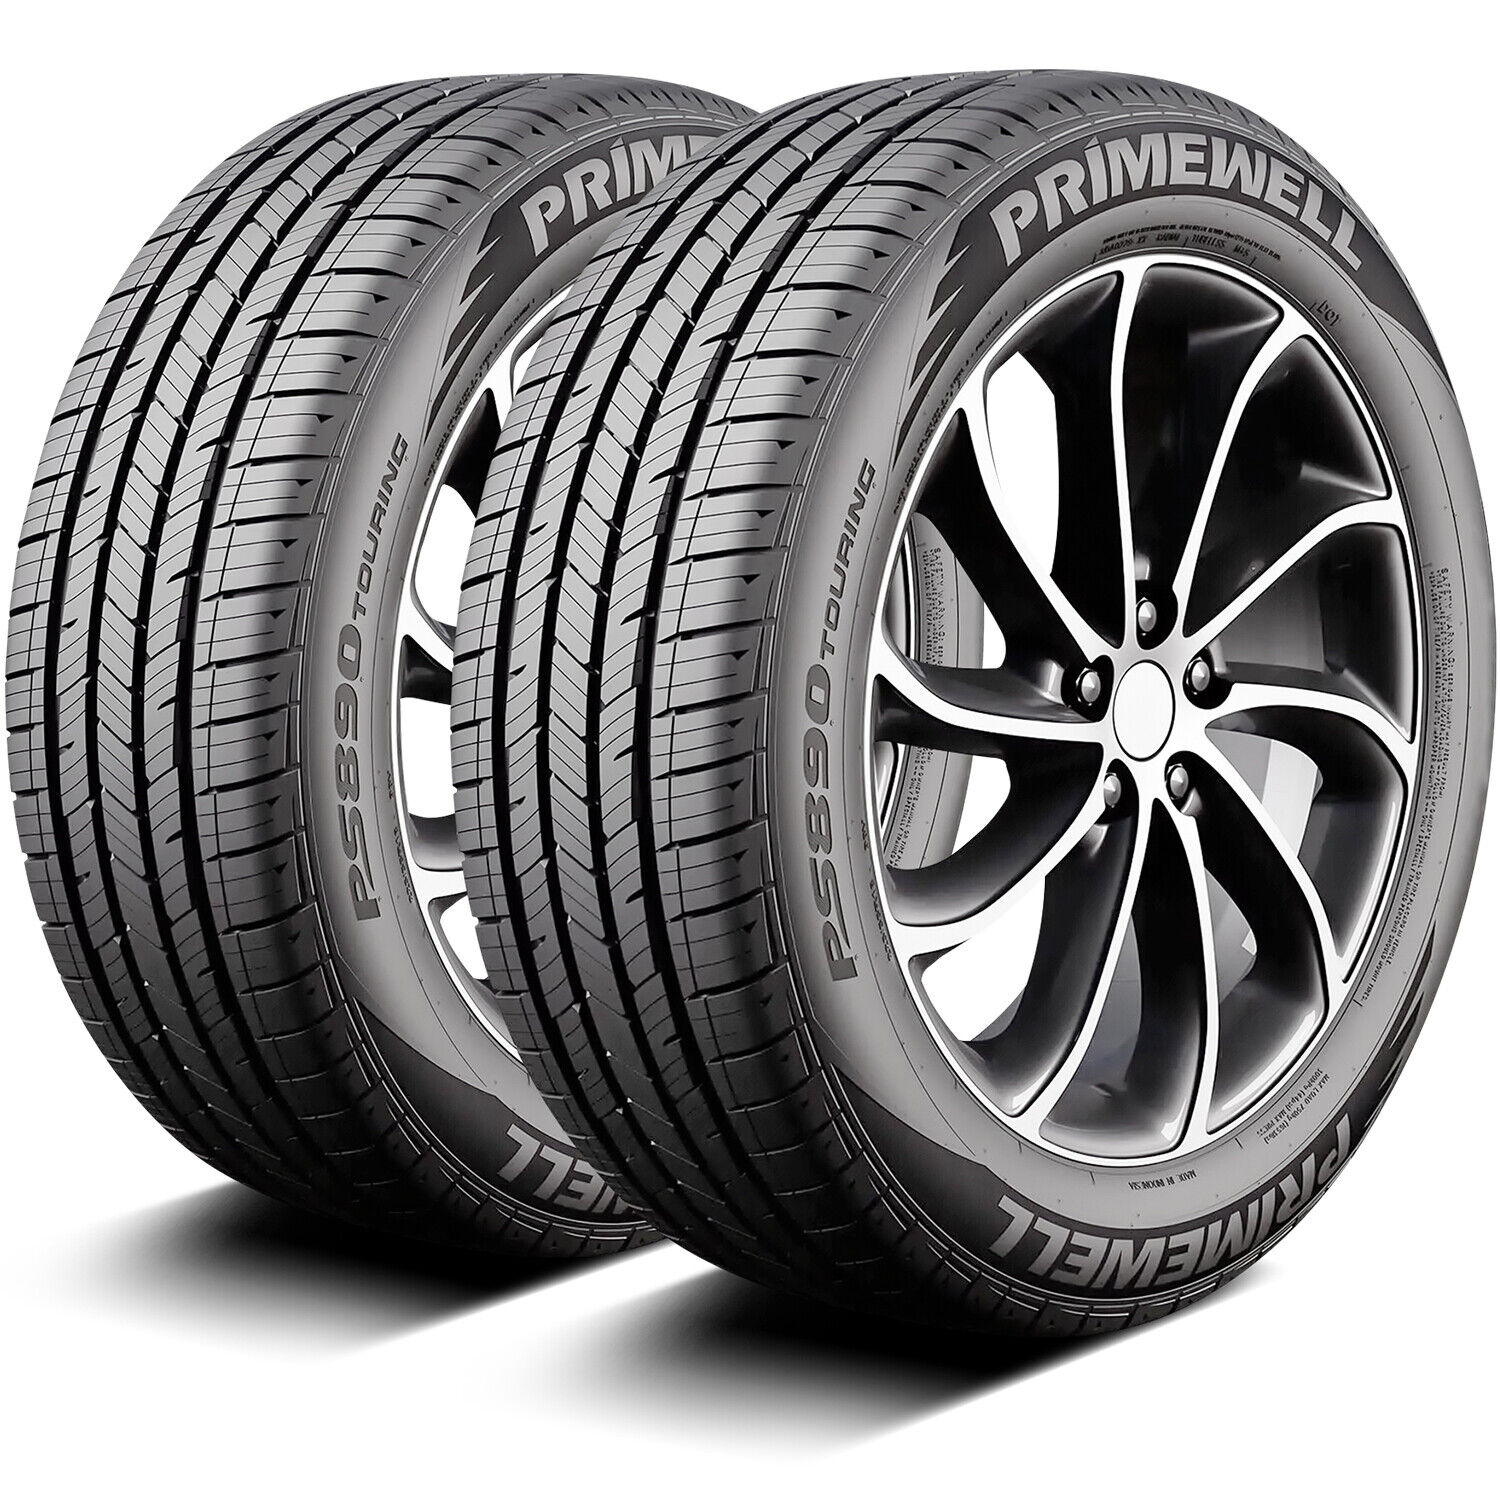 2 Tires Primewell PS890 Touring 185/60R15 84H AS A/S All Season